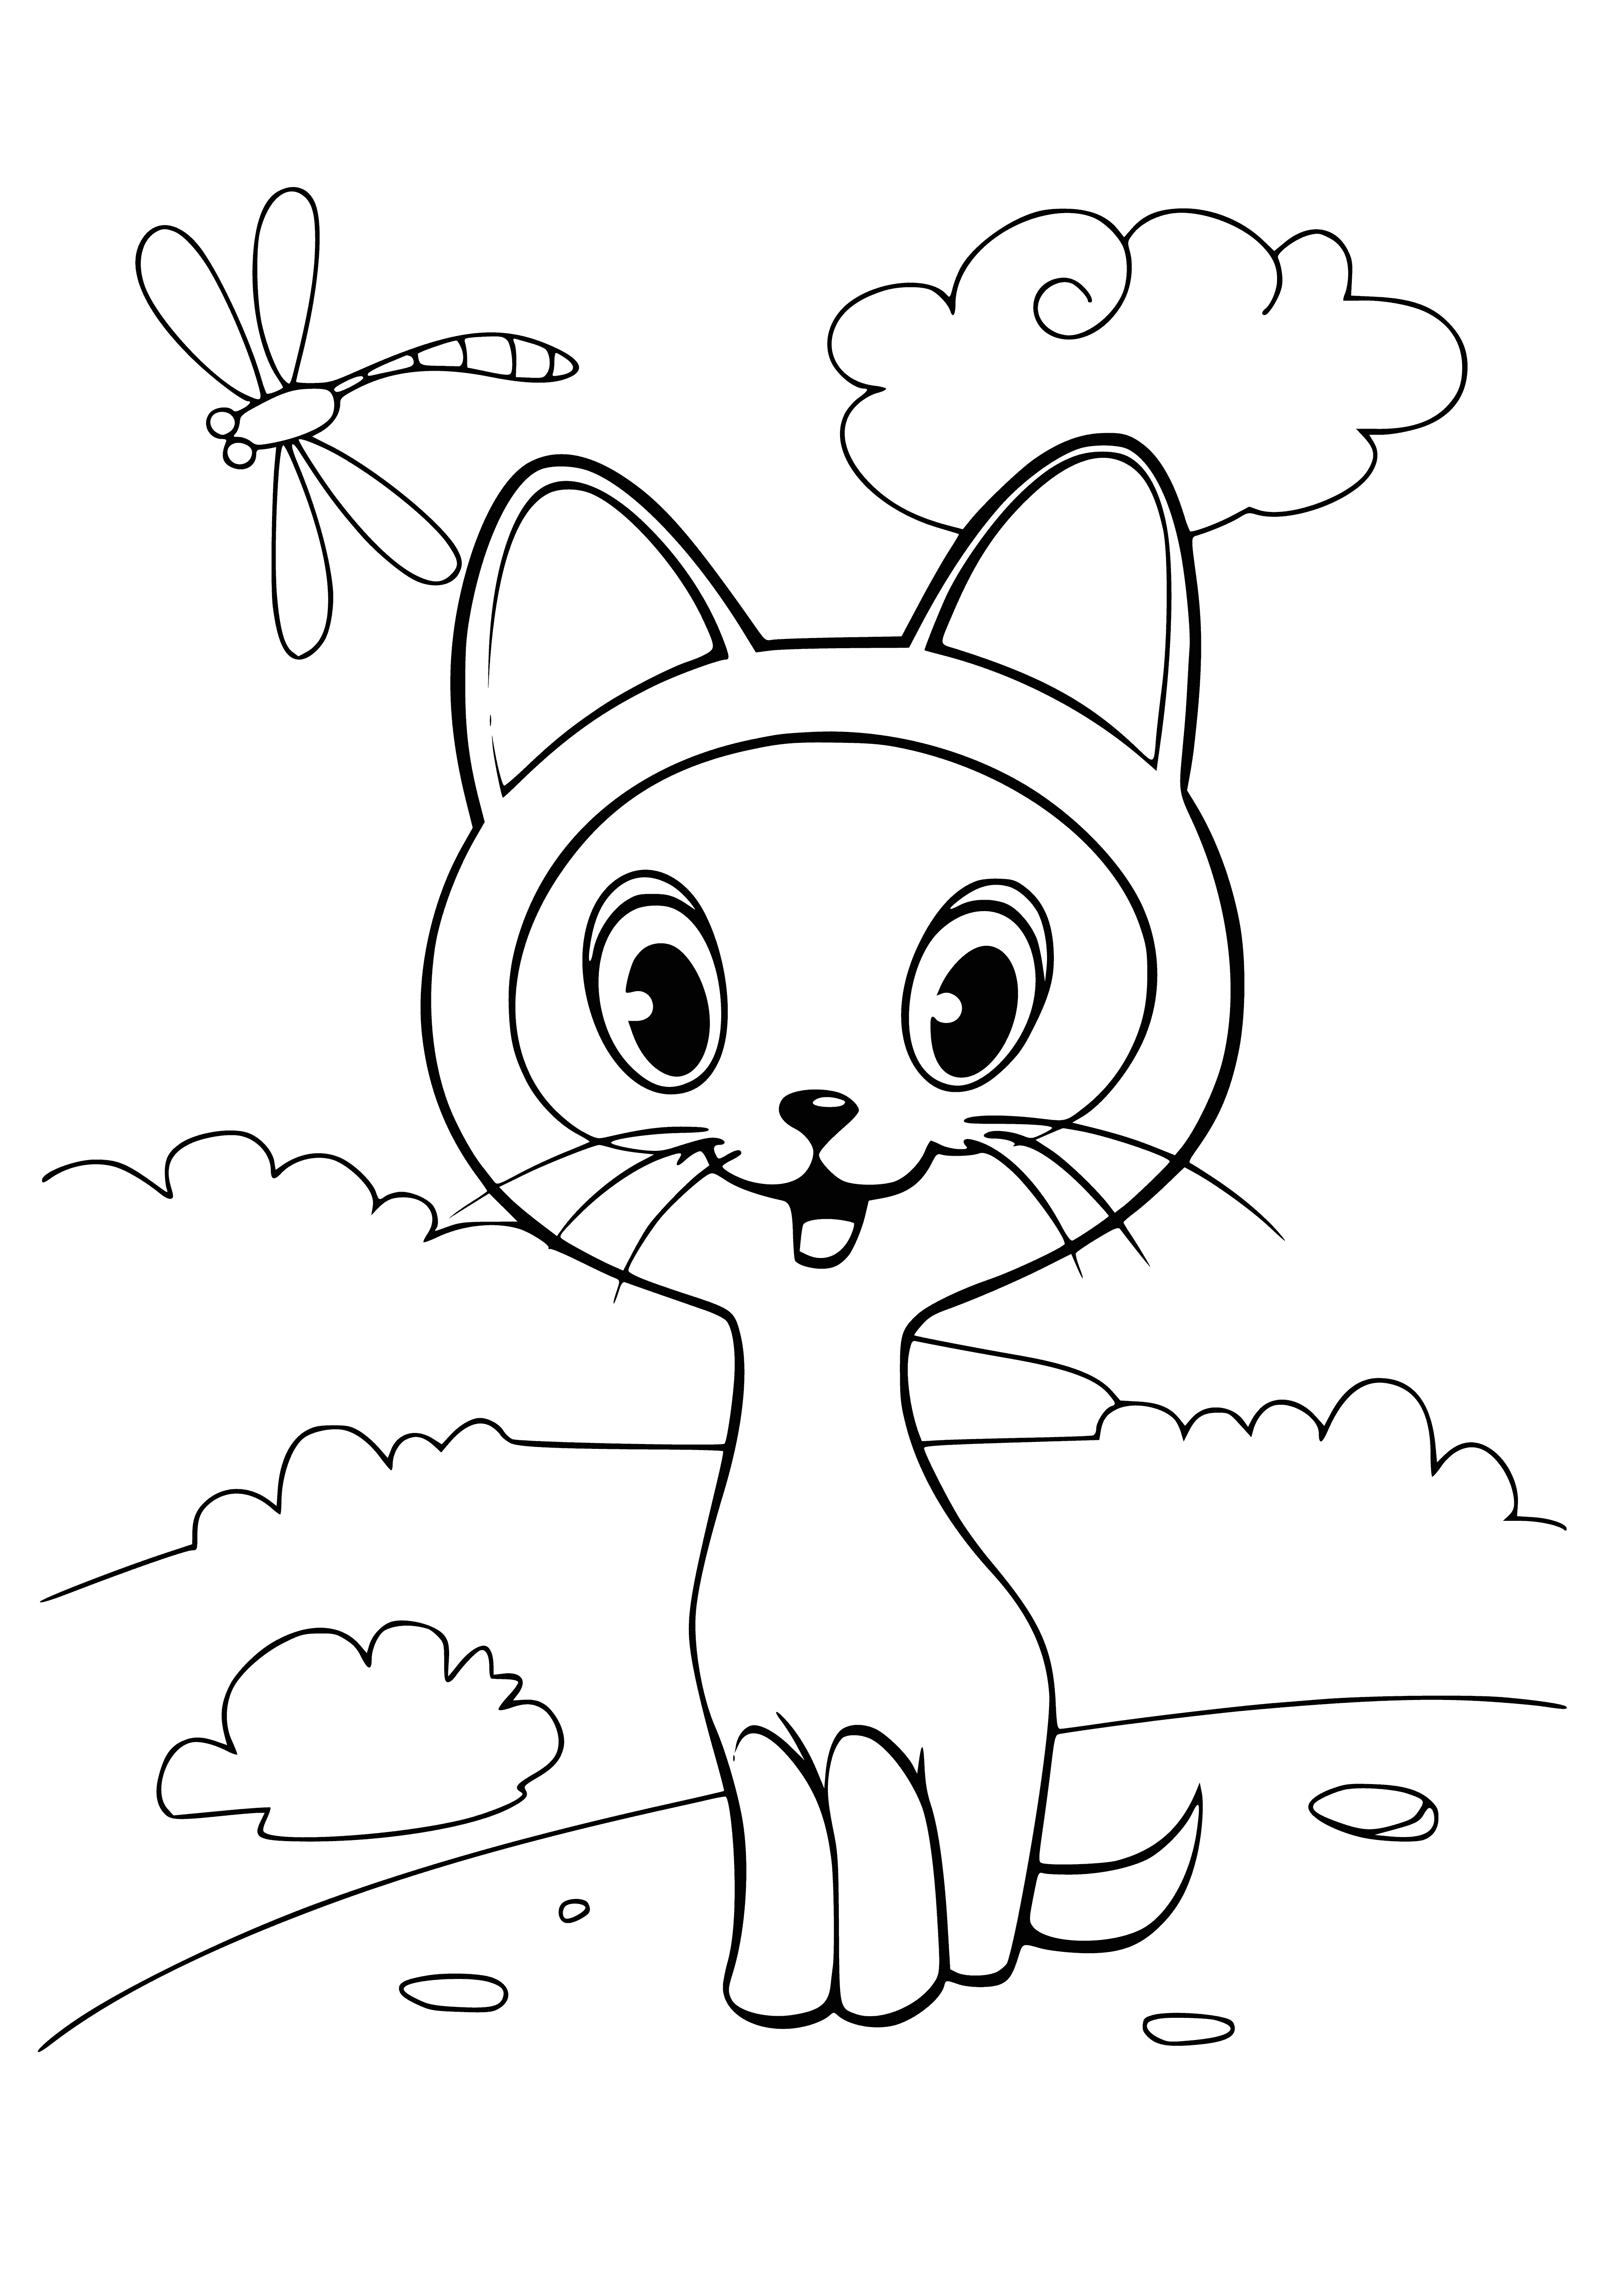 coloring page: Adorable, light-colored kitten w/ short fur & big blue eyes looks like it's very young - perfect for a coloring page!